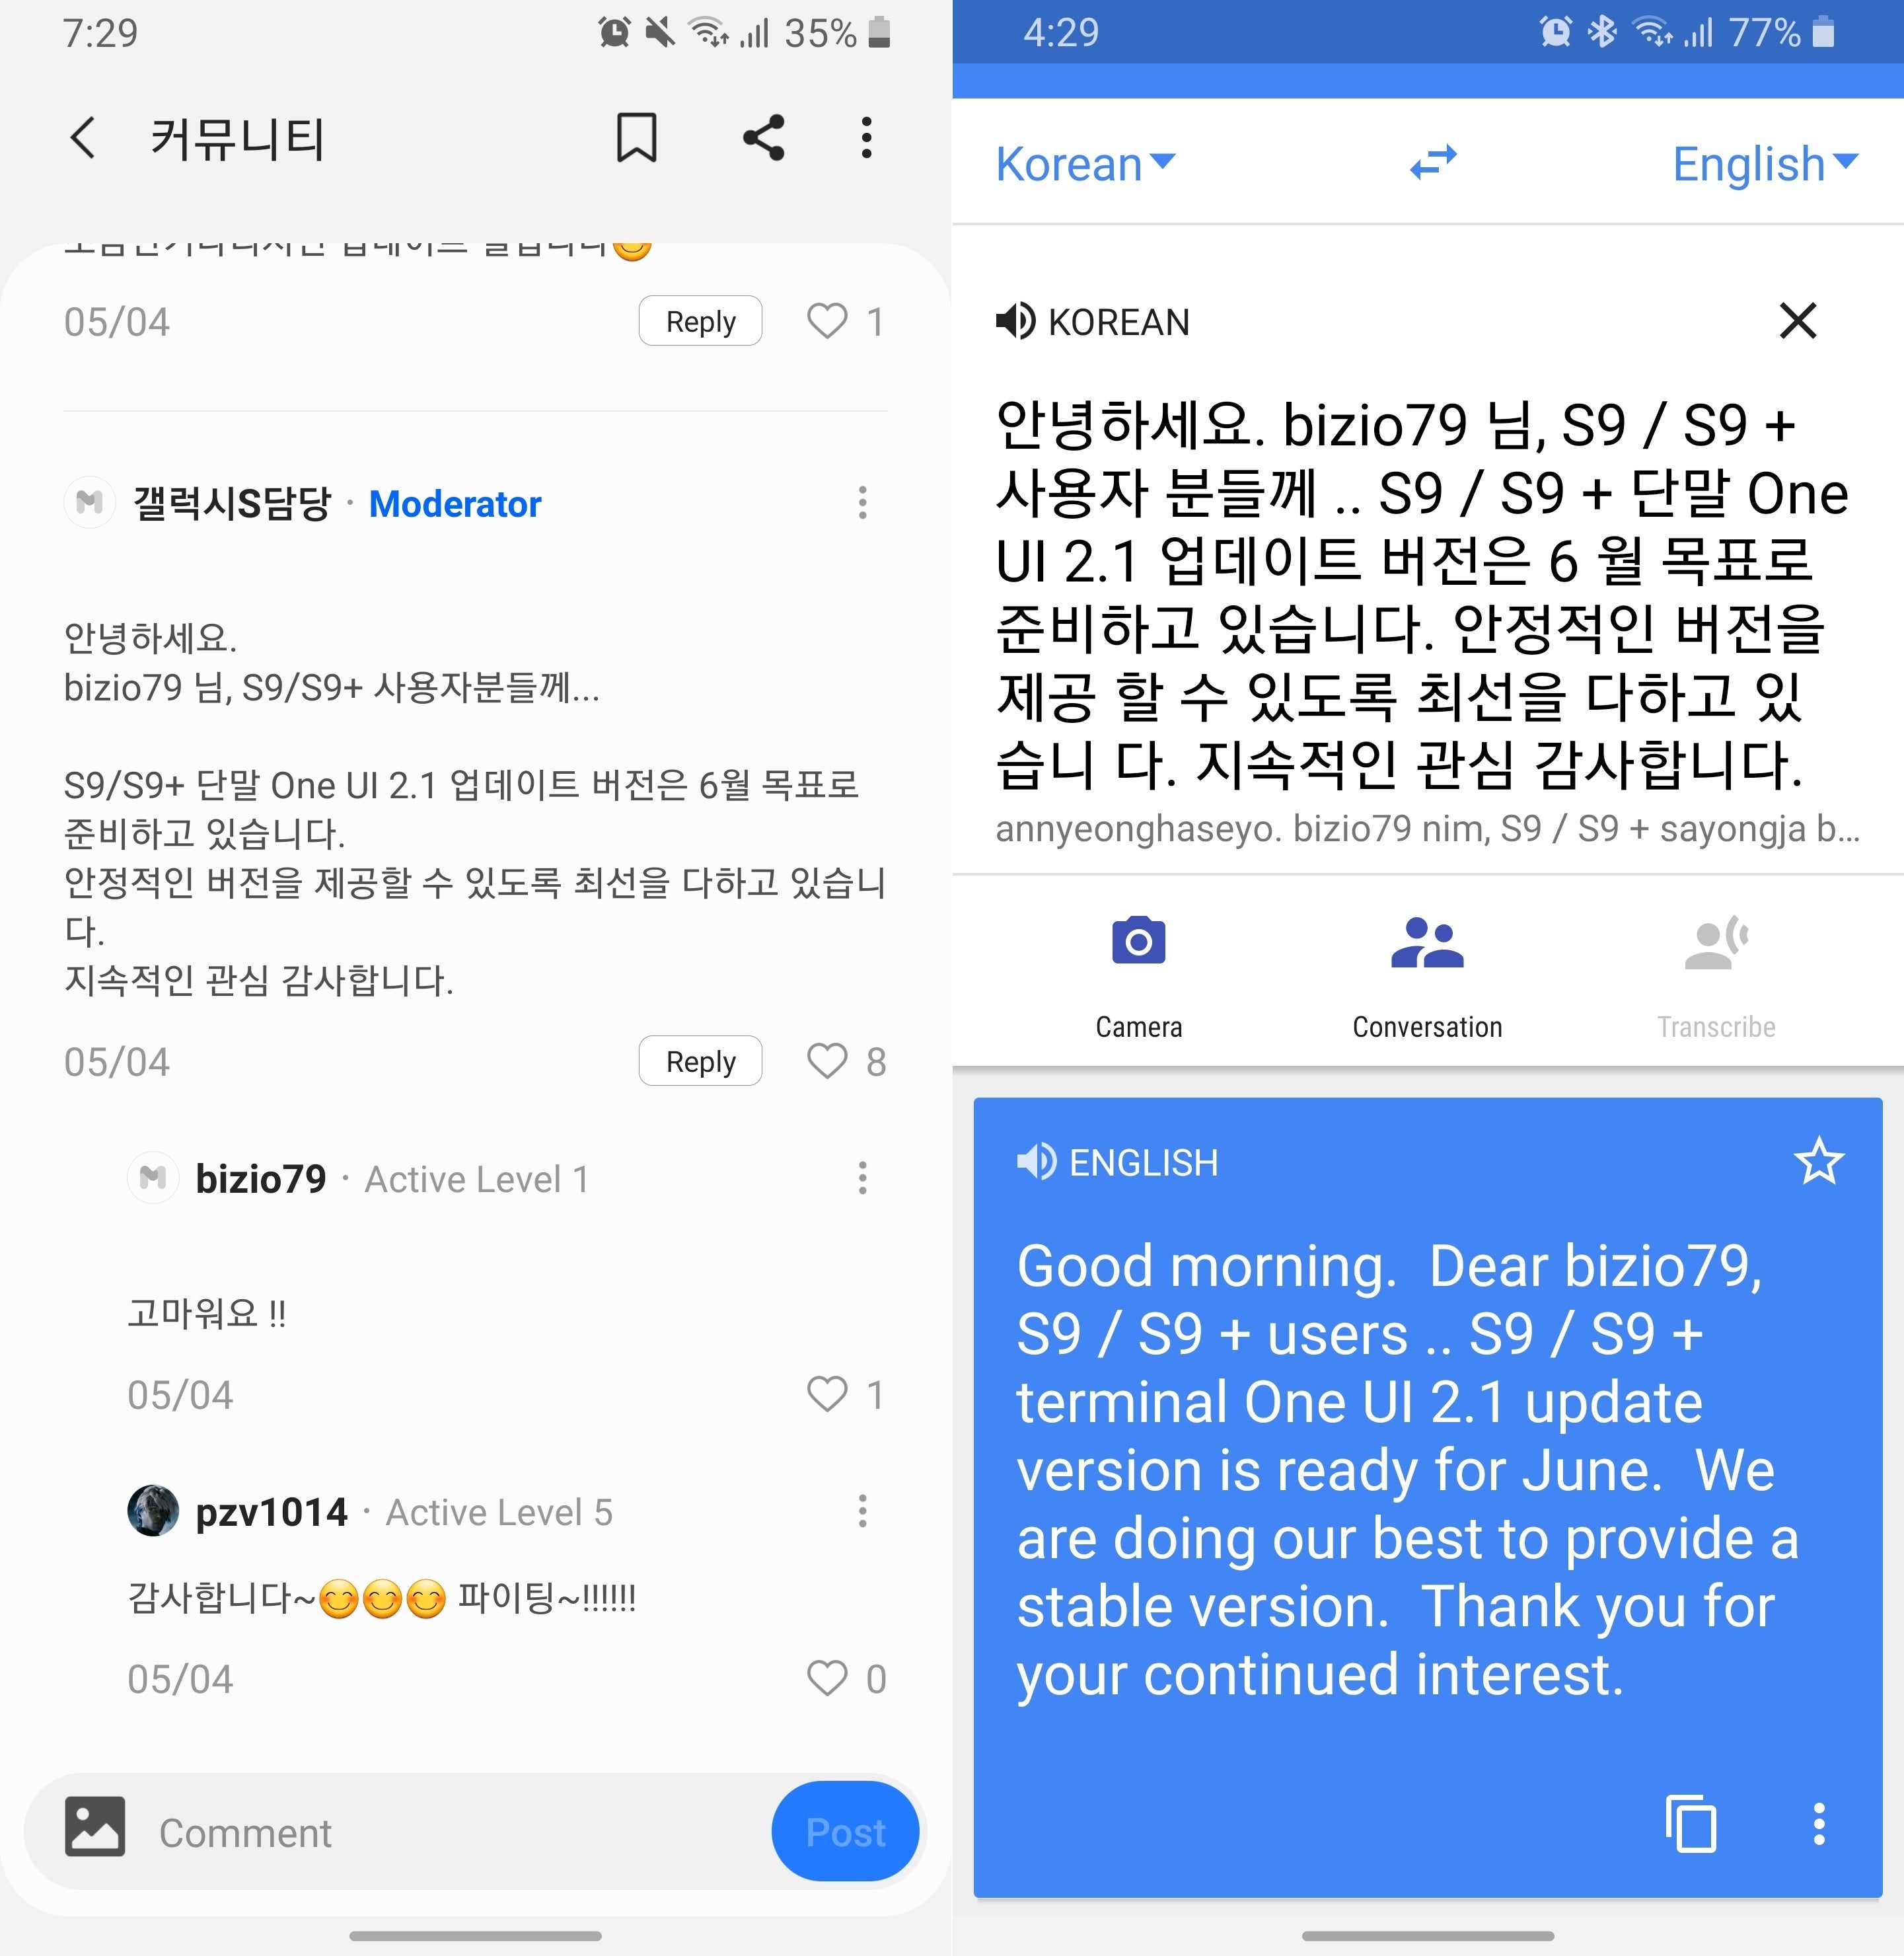 Samsung Korea tipped that the S20's One UI 2.1 on Android 10 features will trickle down to the Galaxy S9 and S9+ this month, and now says it's due this week - The Samsung Galaxy S9 and S9+ One UI 2.1 update may be released as soon as this week